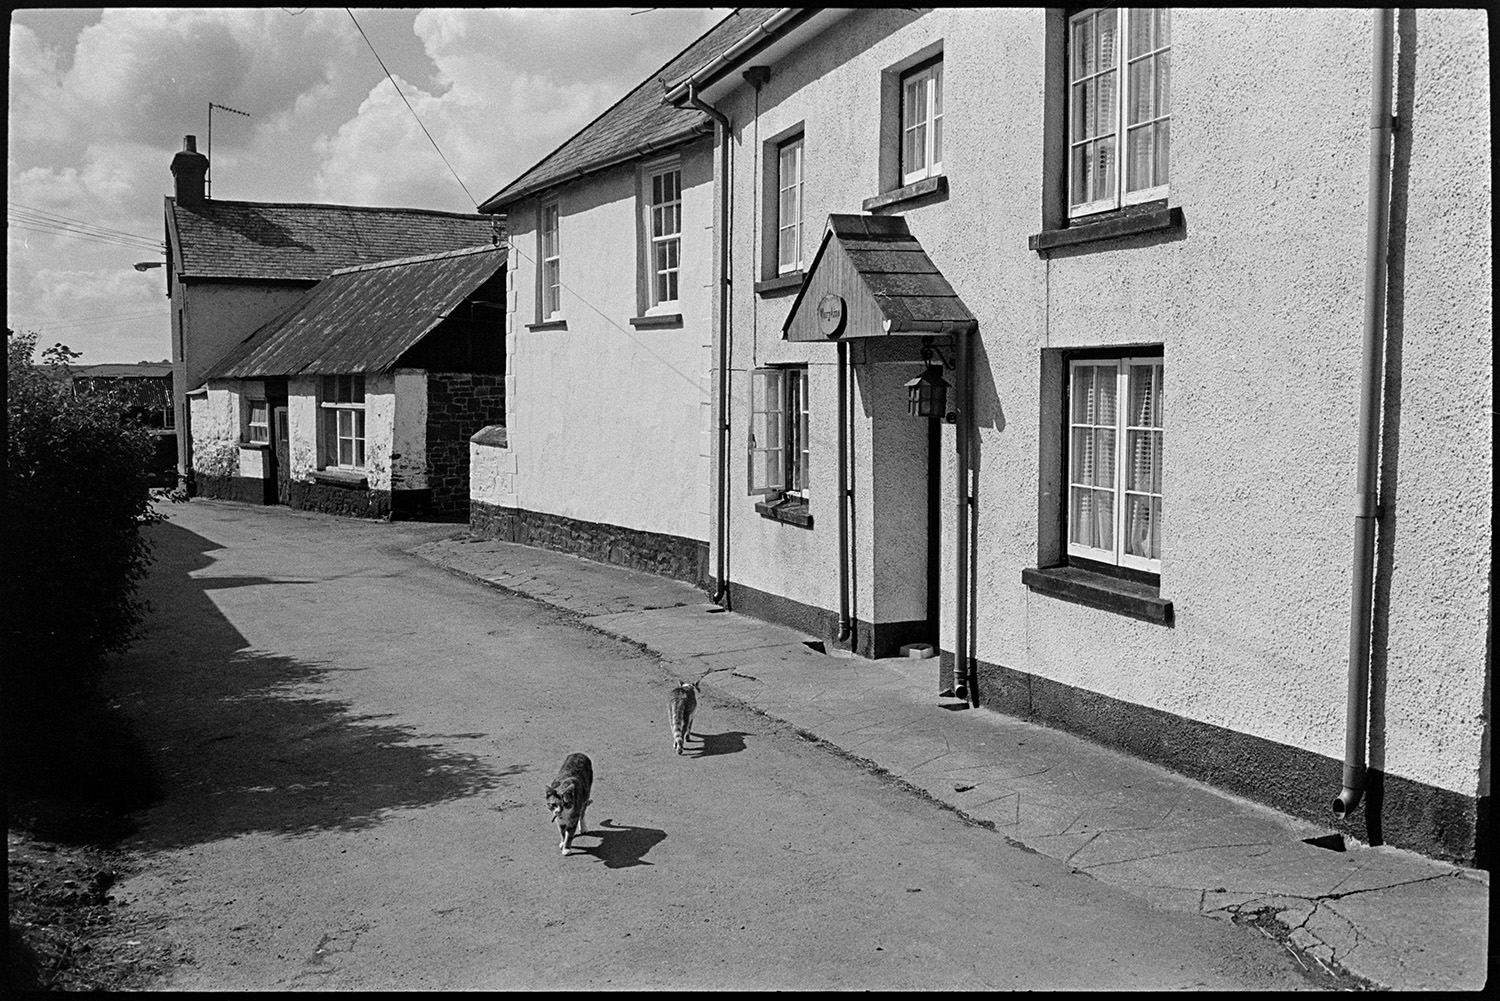 Village street scenes, bicycles, cat. 
[Two cats walking away from each other in a street in Kings Nympton. One of them is walking toward a house with a porch and lamp outside.]